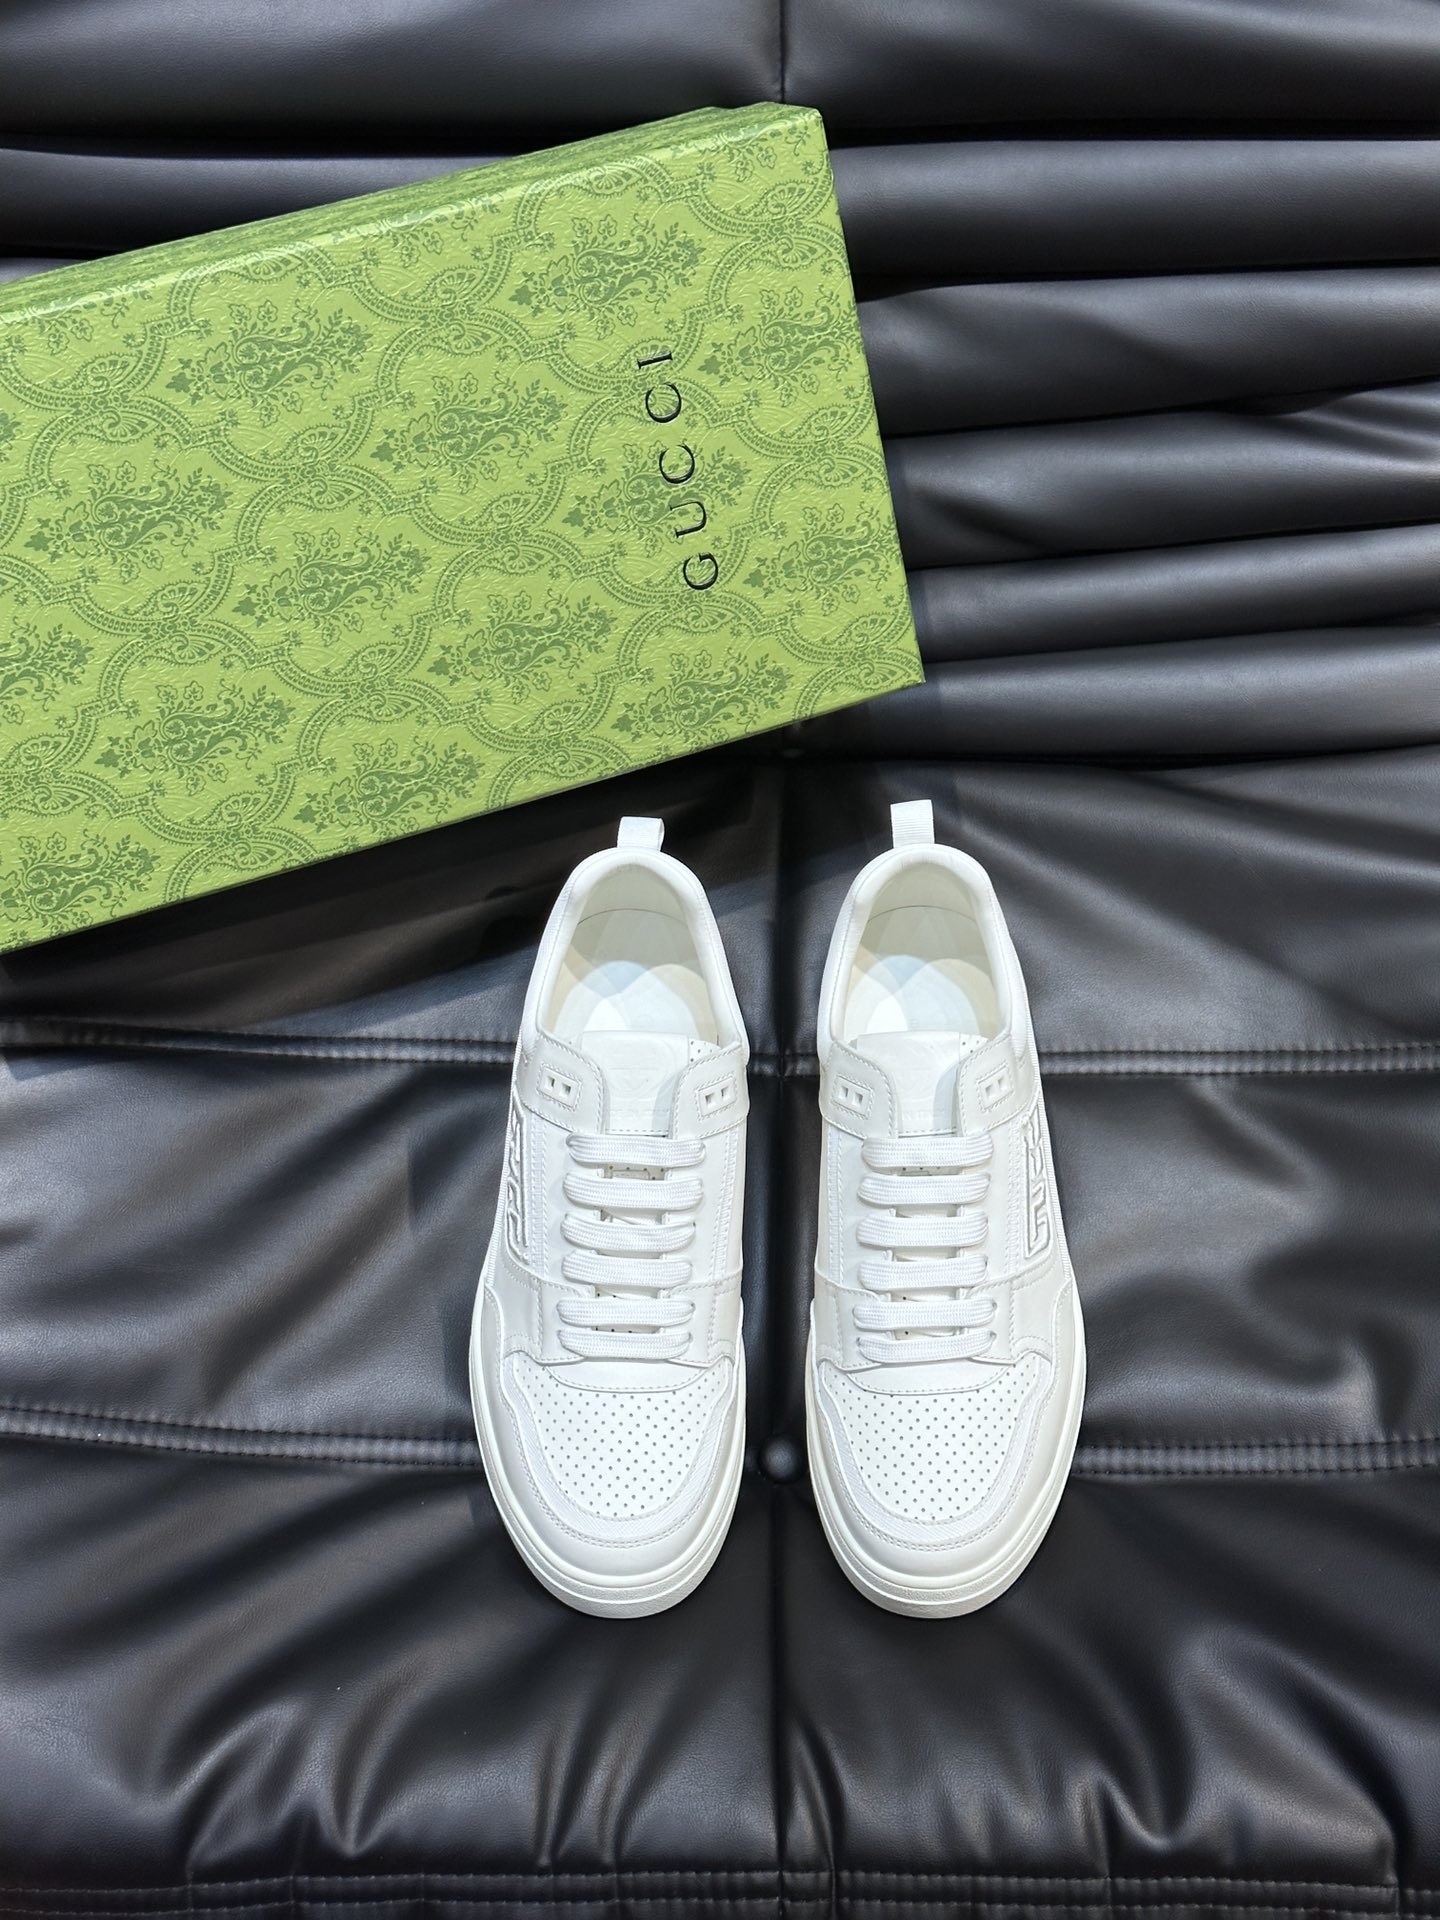 Where can I buy the best 1:1 original
 Gucci Luxury
 Skateboard Shoes Sneakers White Men Vintage Casual